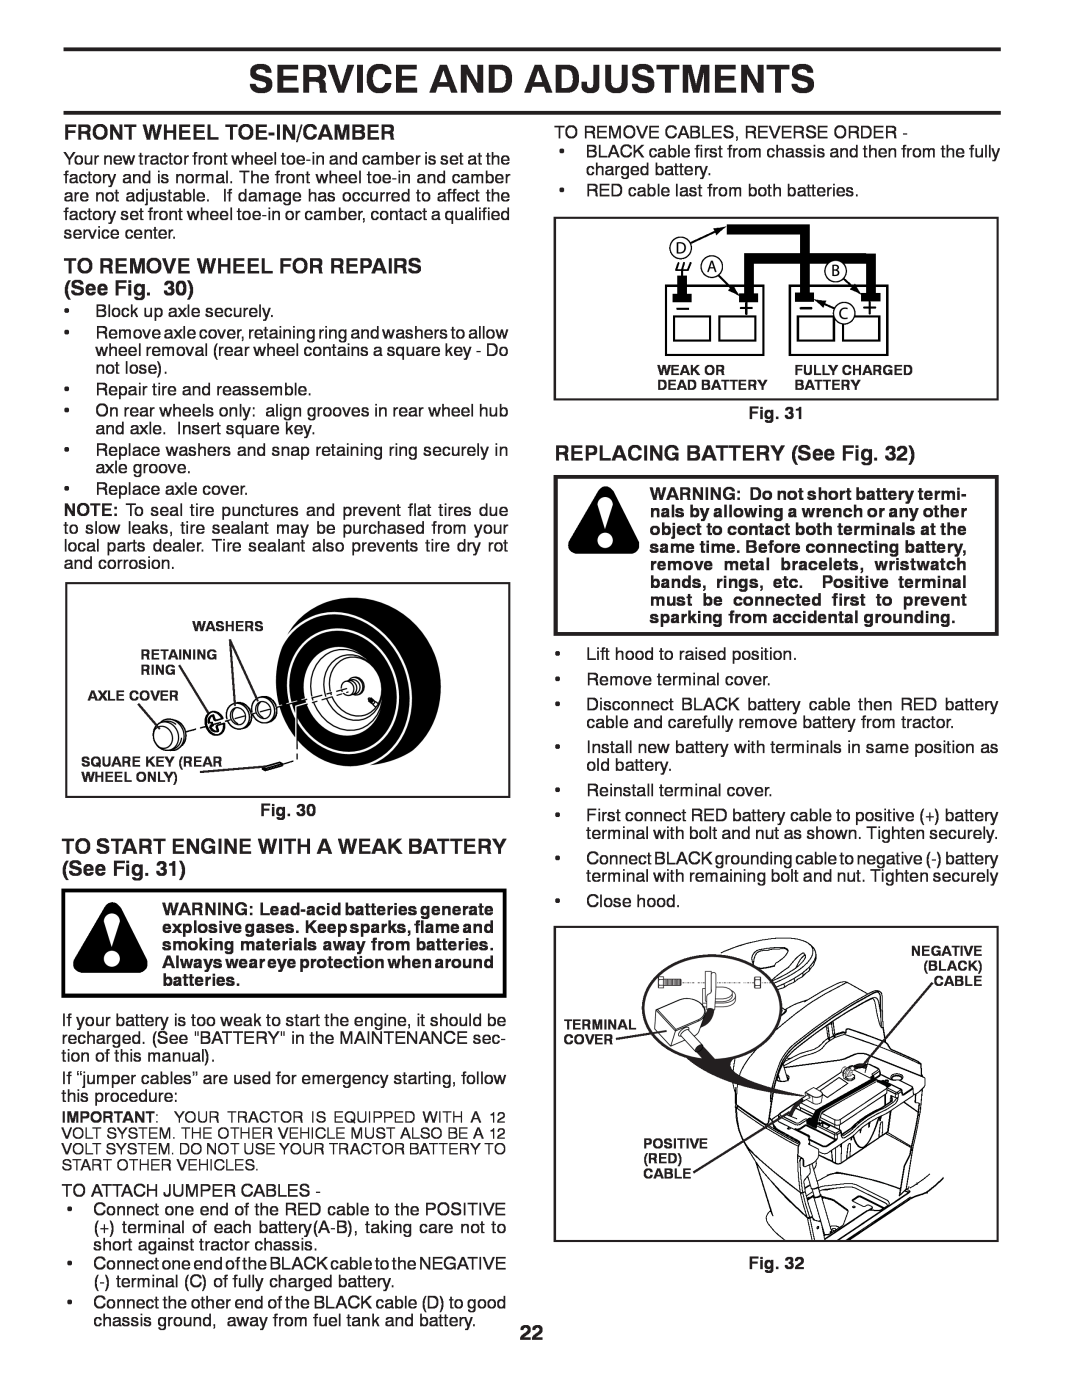 Husqvarna YTH2042TD manual Front Wheel Toe-In/Camber, TO REMOVE WHEEL FOR REPAIRS See Fig, REPLACING BATTERY See Fig 